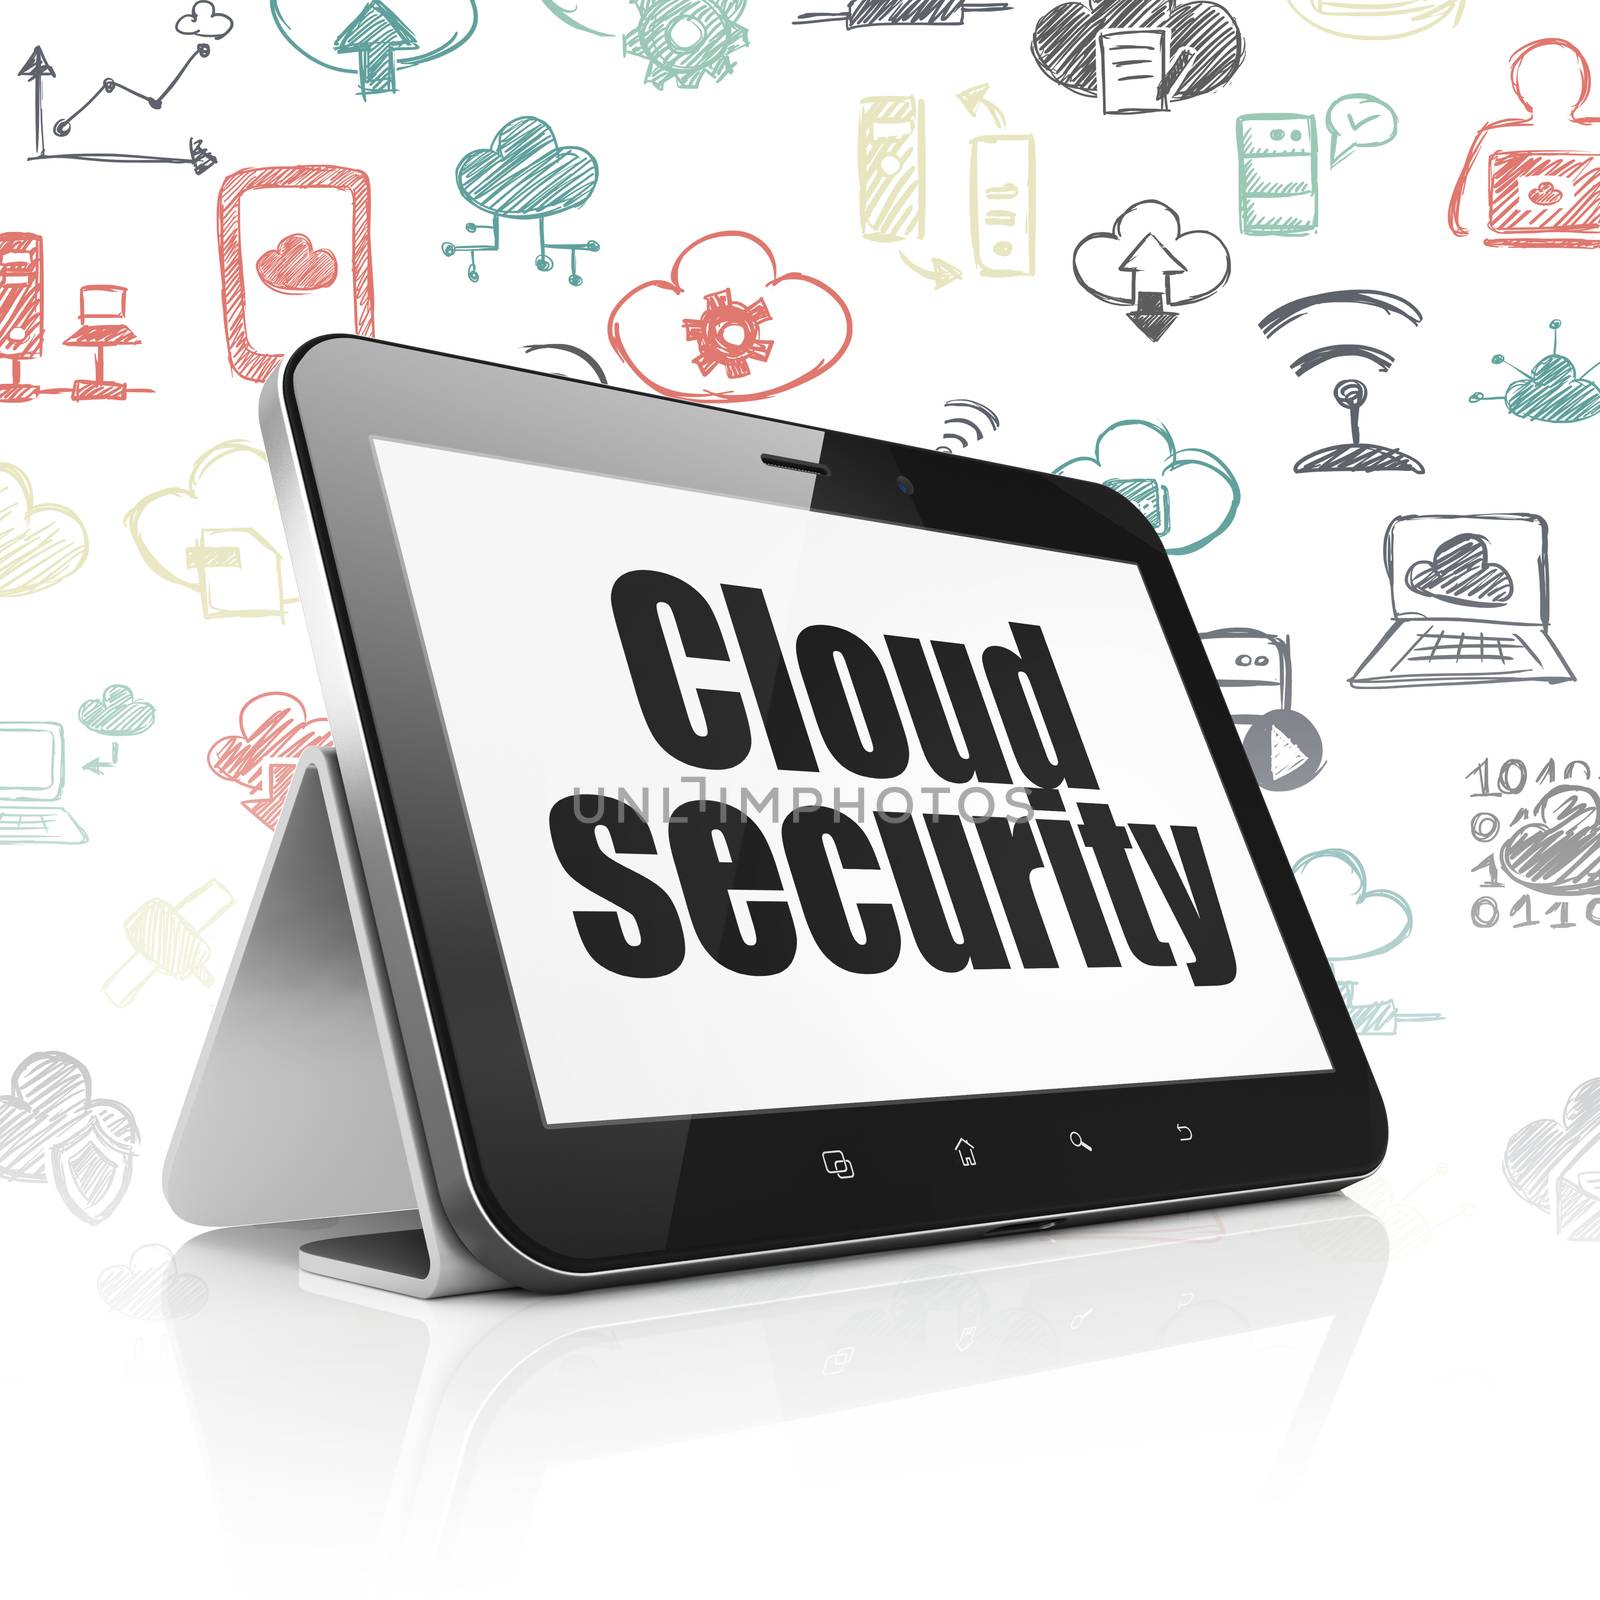 Cloud computing concept: Tablet Computer with  black text Cloud Security on display,  Hand Drawn Cloud Technology Icons background, 3D rendering